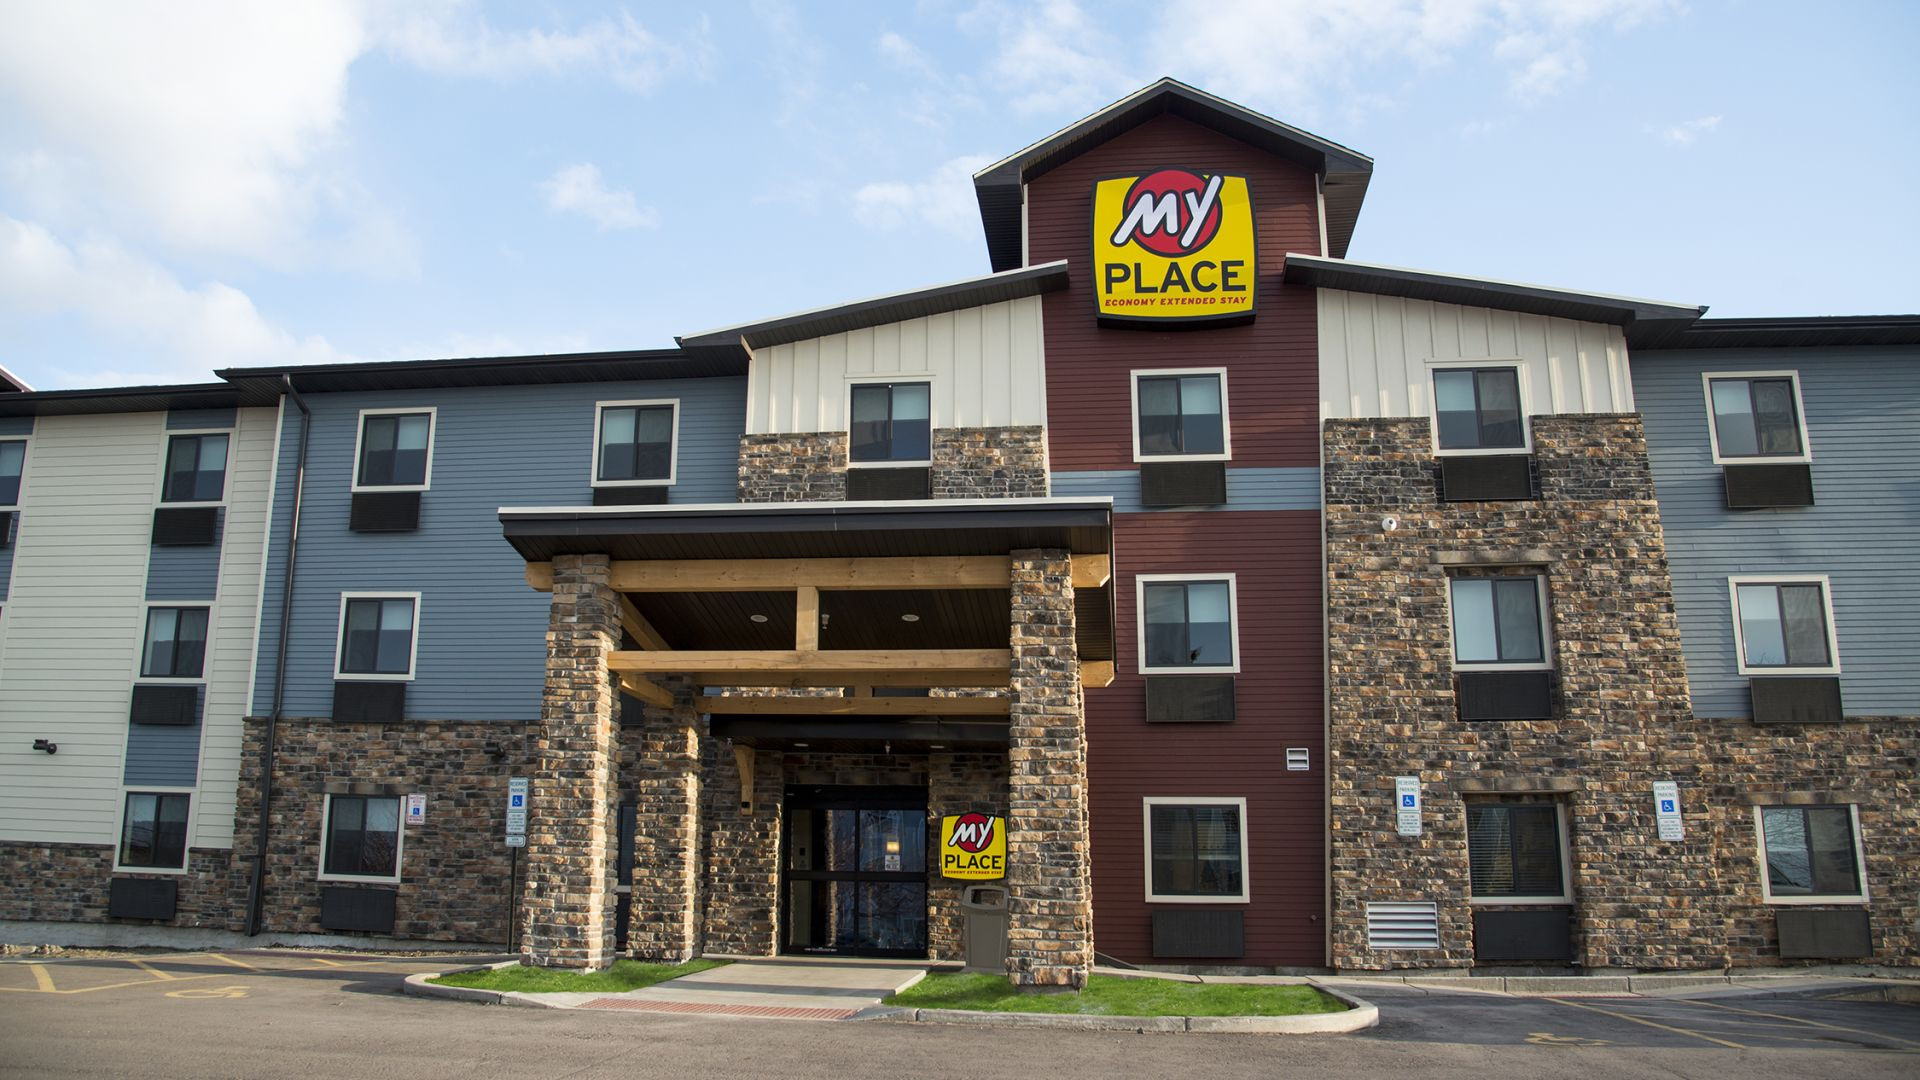 Pet Friendly My Place Hotel-Sioux Falls, SD in Sioux Falls, South Dakota